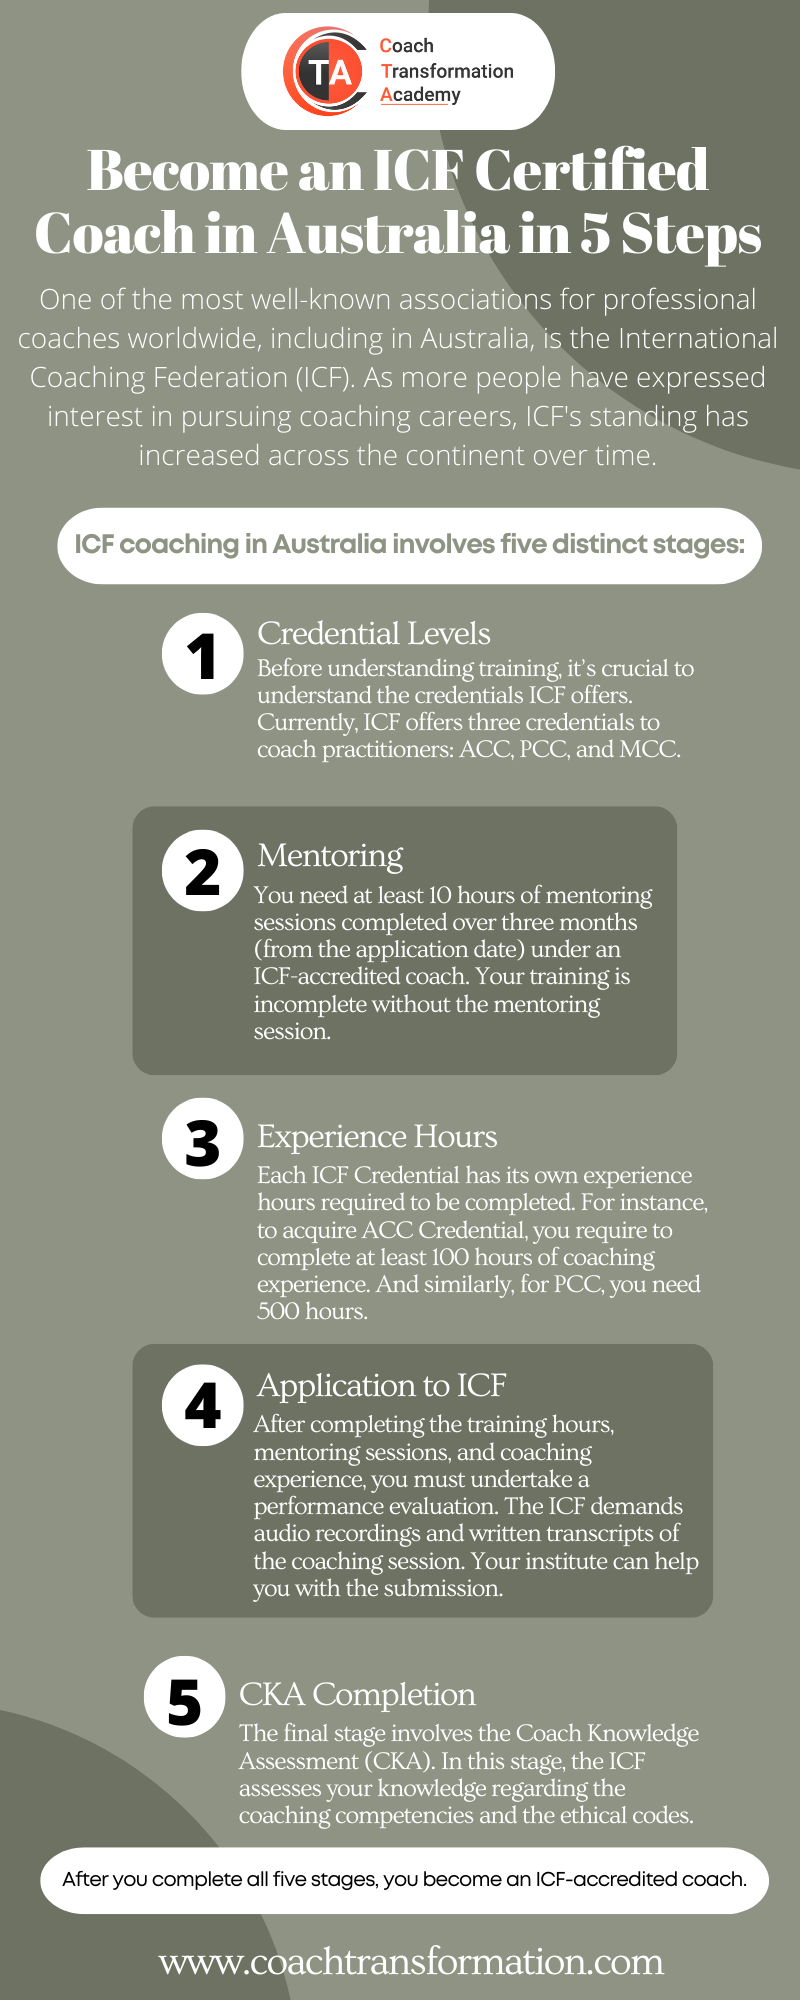 5 Steps to ICF Coach Certification in Australia – Coach Transformation Academy